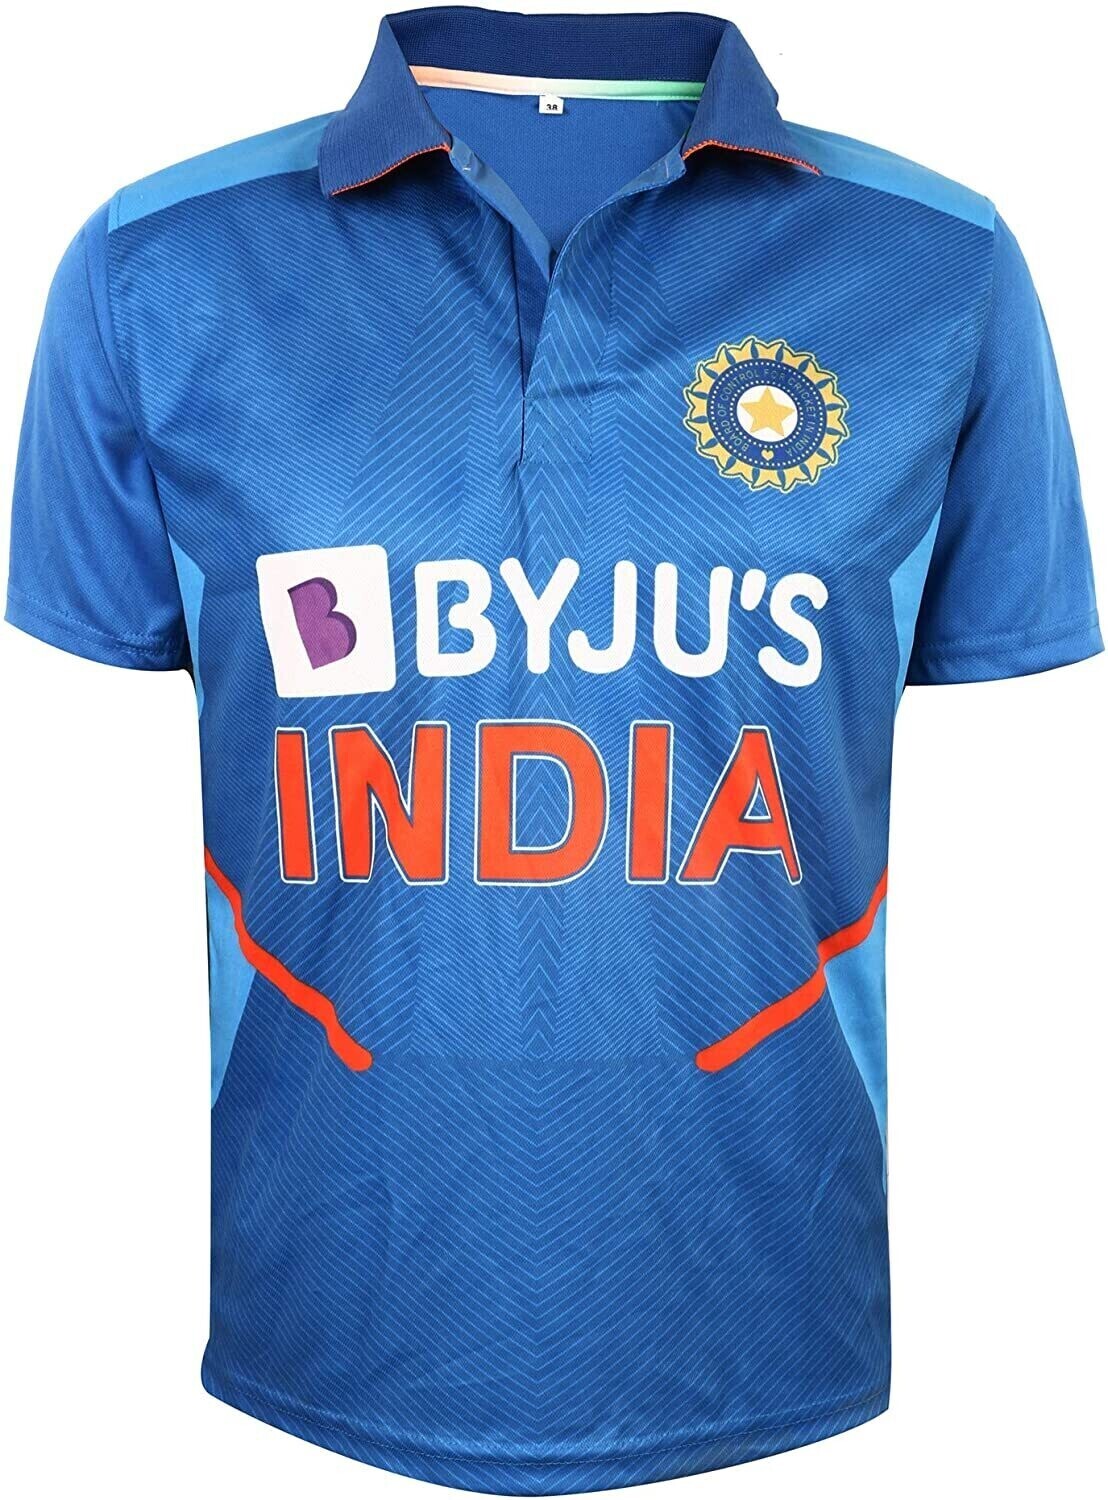 Buy Indian Cricket Team 2020 Jersey Online India Usa